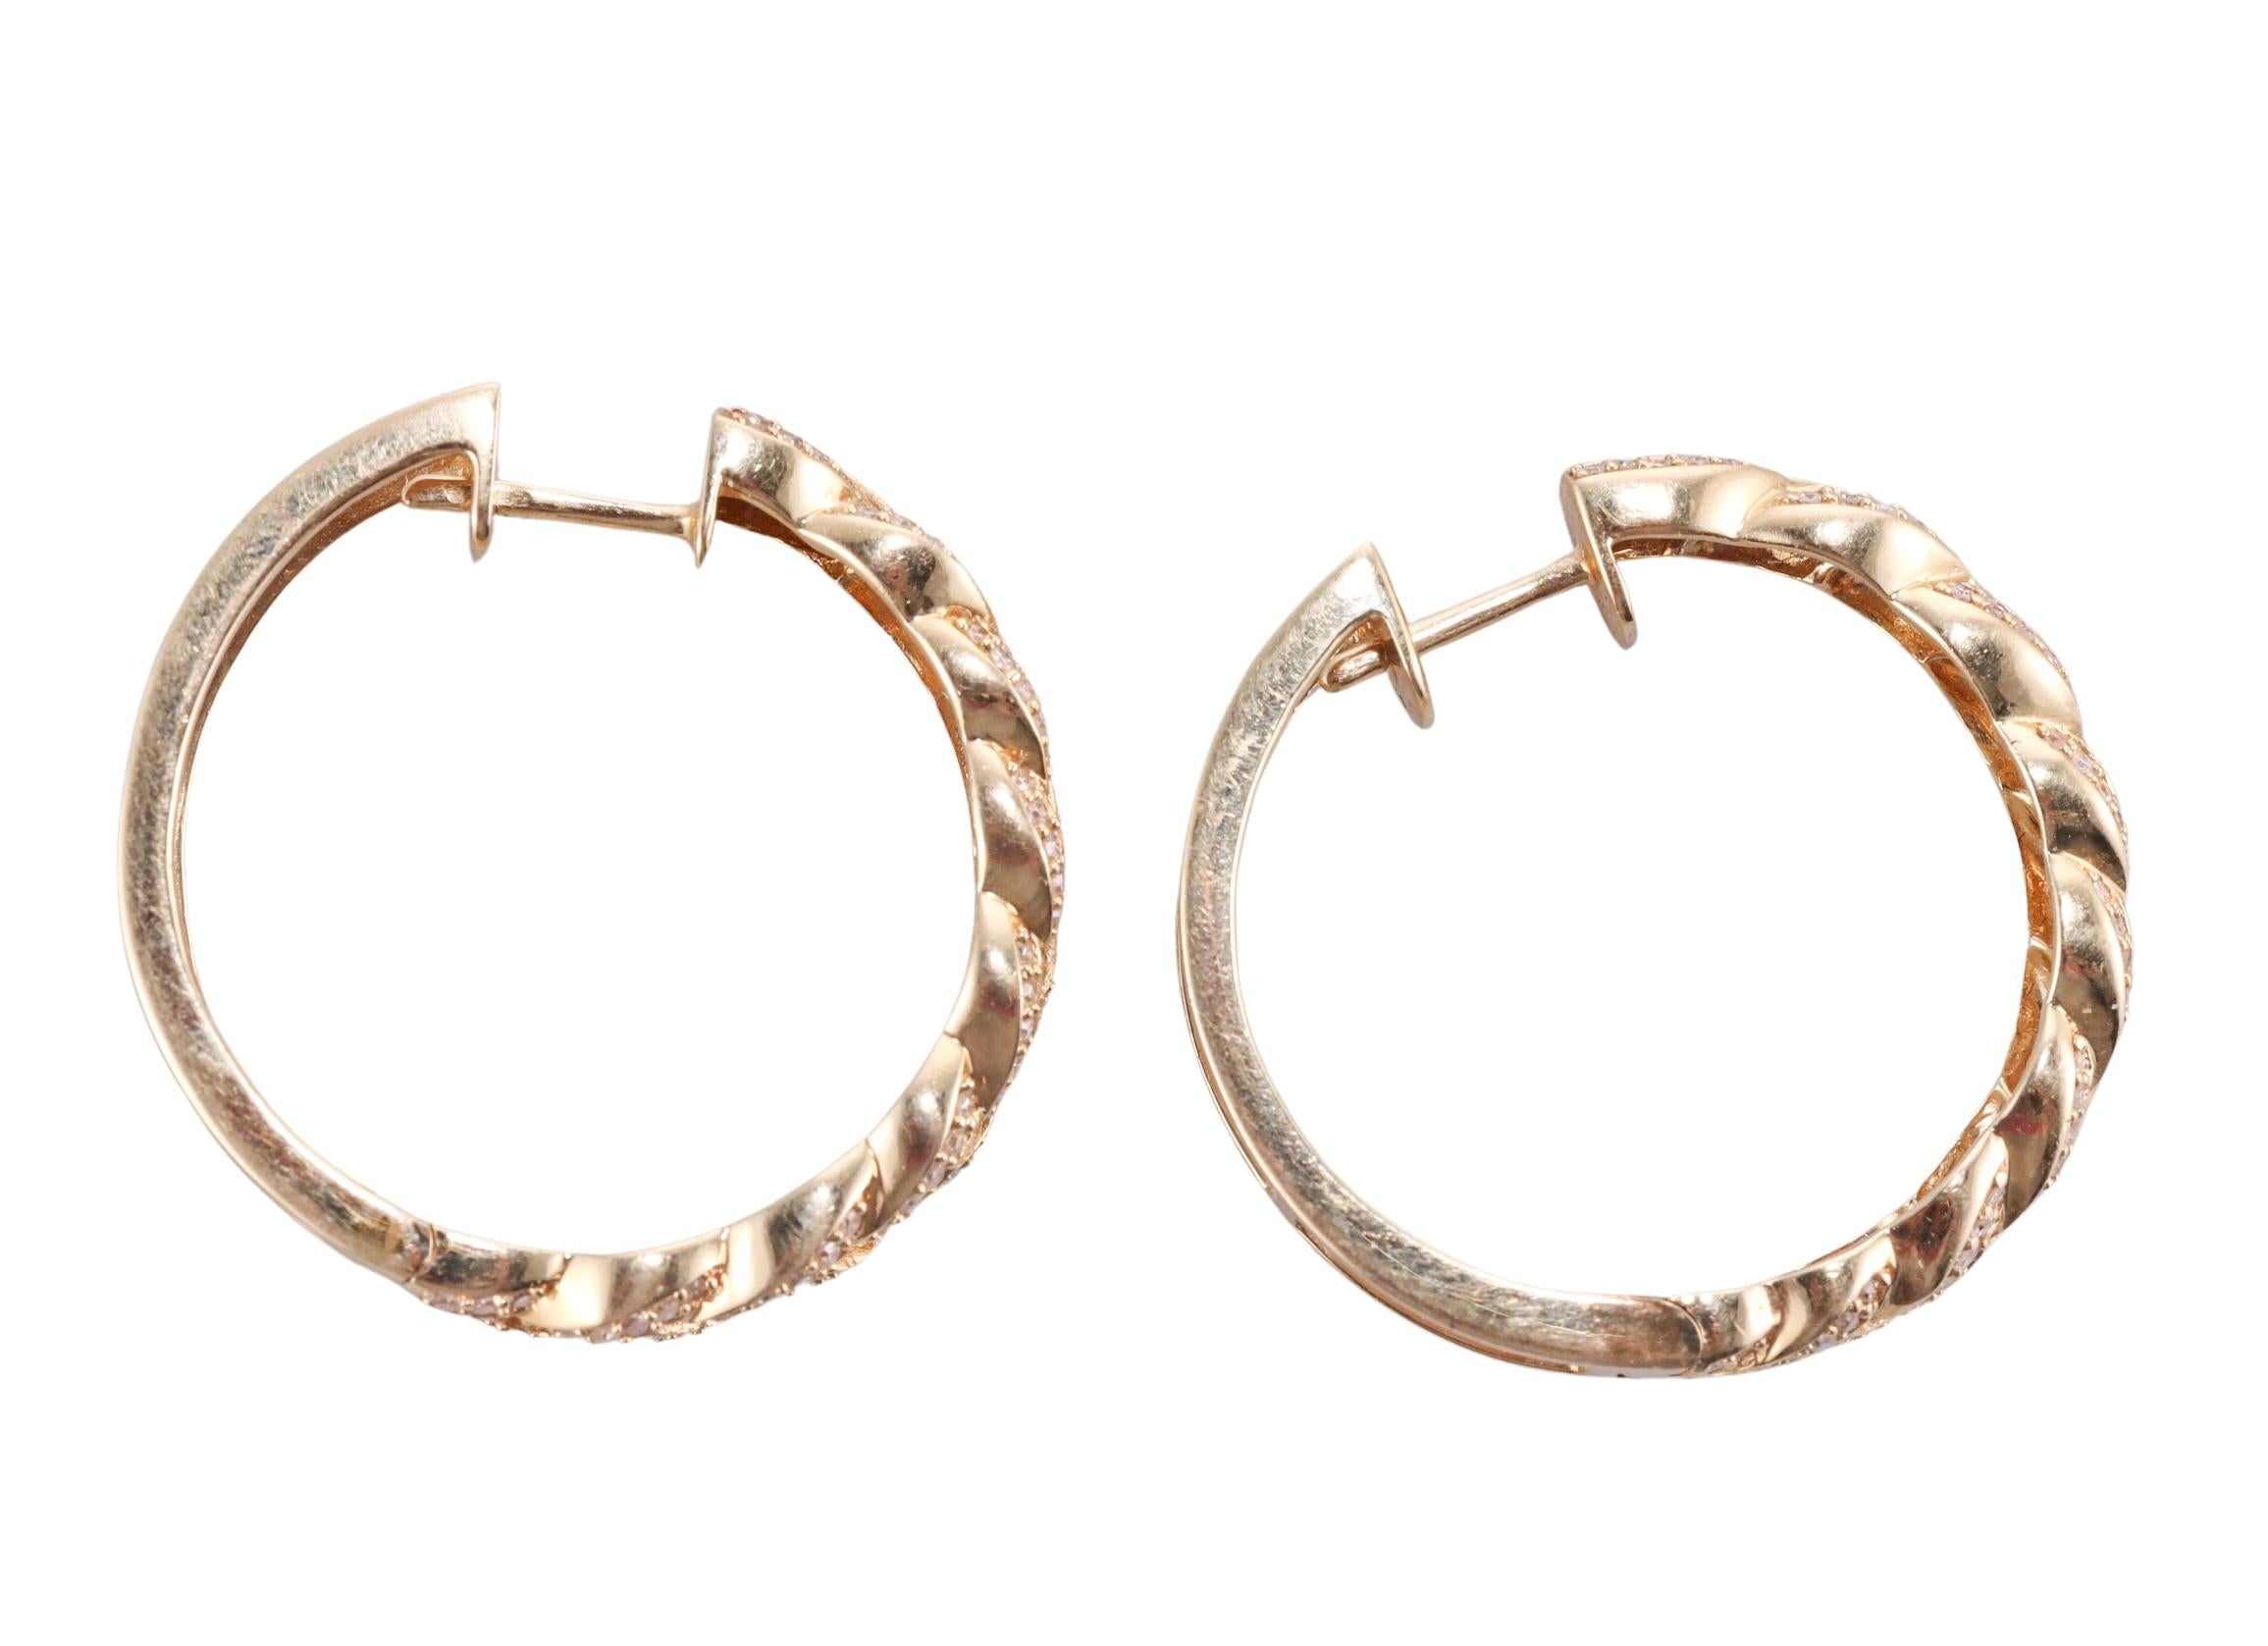 Gold Diamond Braided Hoop Earrings In Excellent Condition For Sale In New York, NY